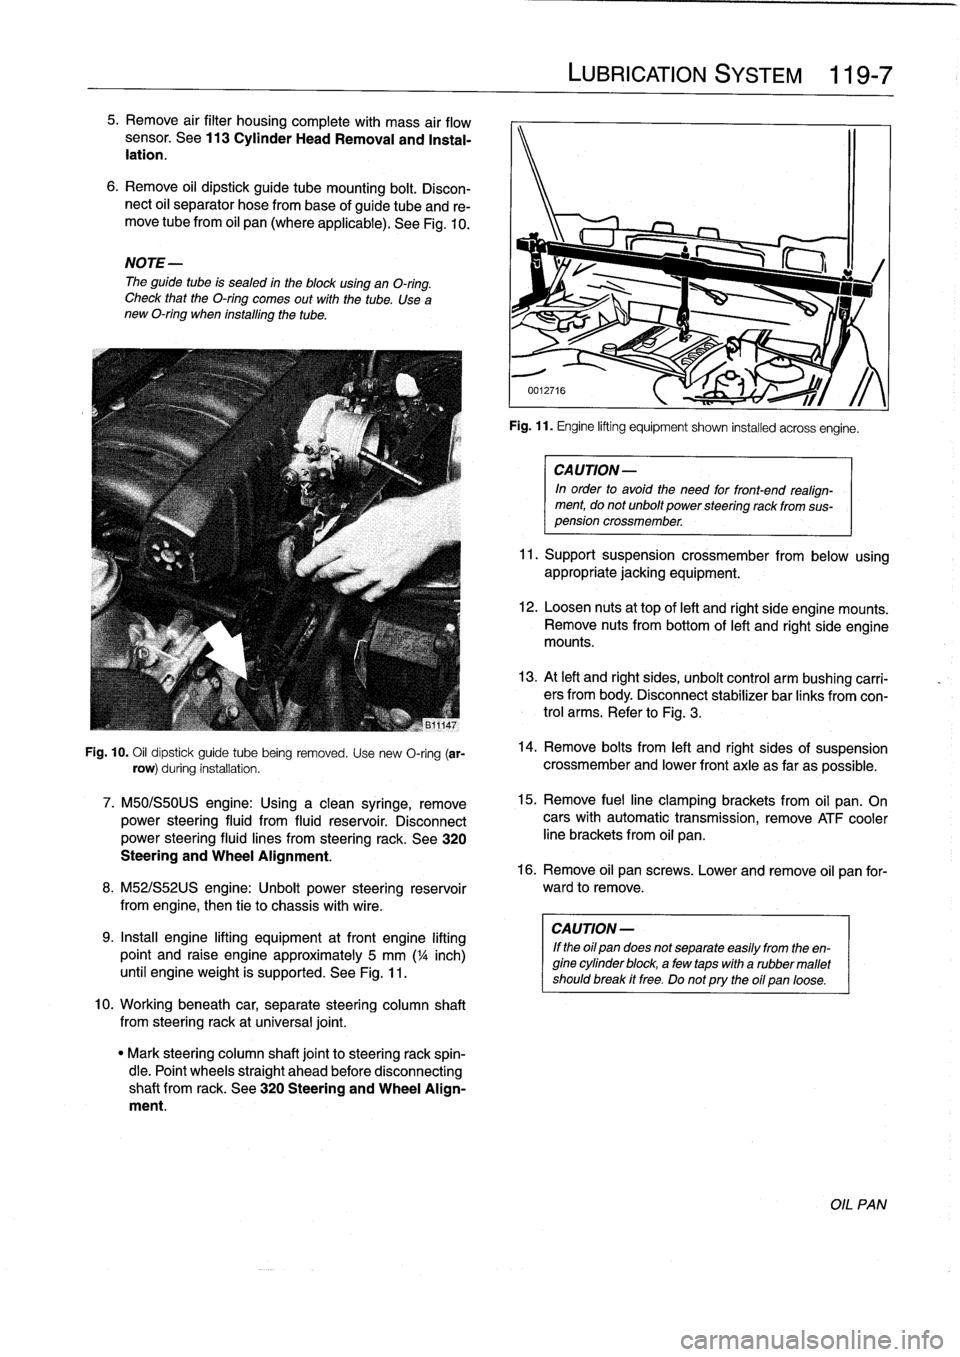 BMW 318i 1995 E36 Workshop Manual 
5
.
Remove
air
filter
housingcomplete
with
mass
air
flow
sensor
.
See113
Cylinder
HeadRemoval
and
Instal-
lation
.

6
.
Remove
oil
dipstick
guide
tube
mounting
bolt
.
Discon-
nect
oil
separator
hose
